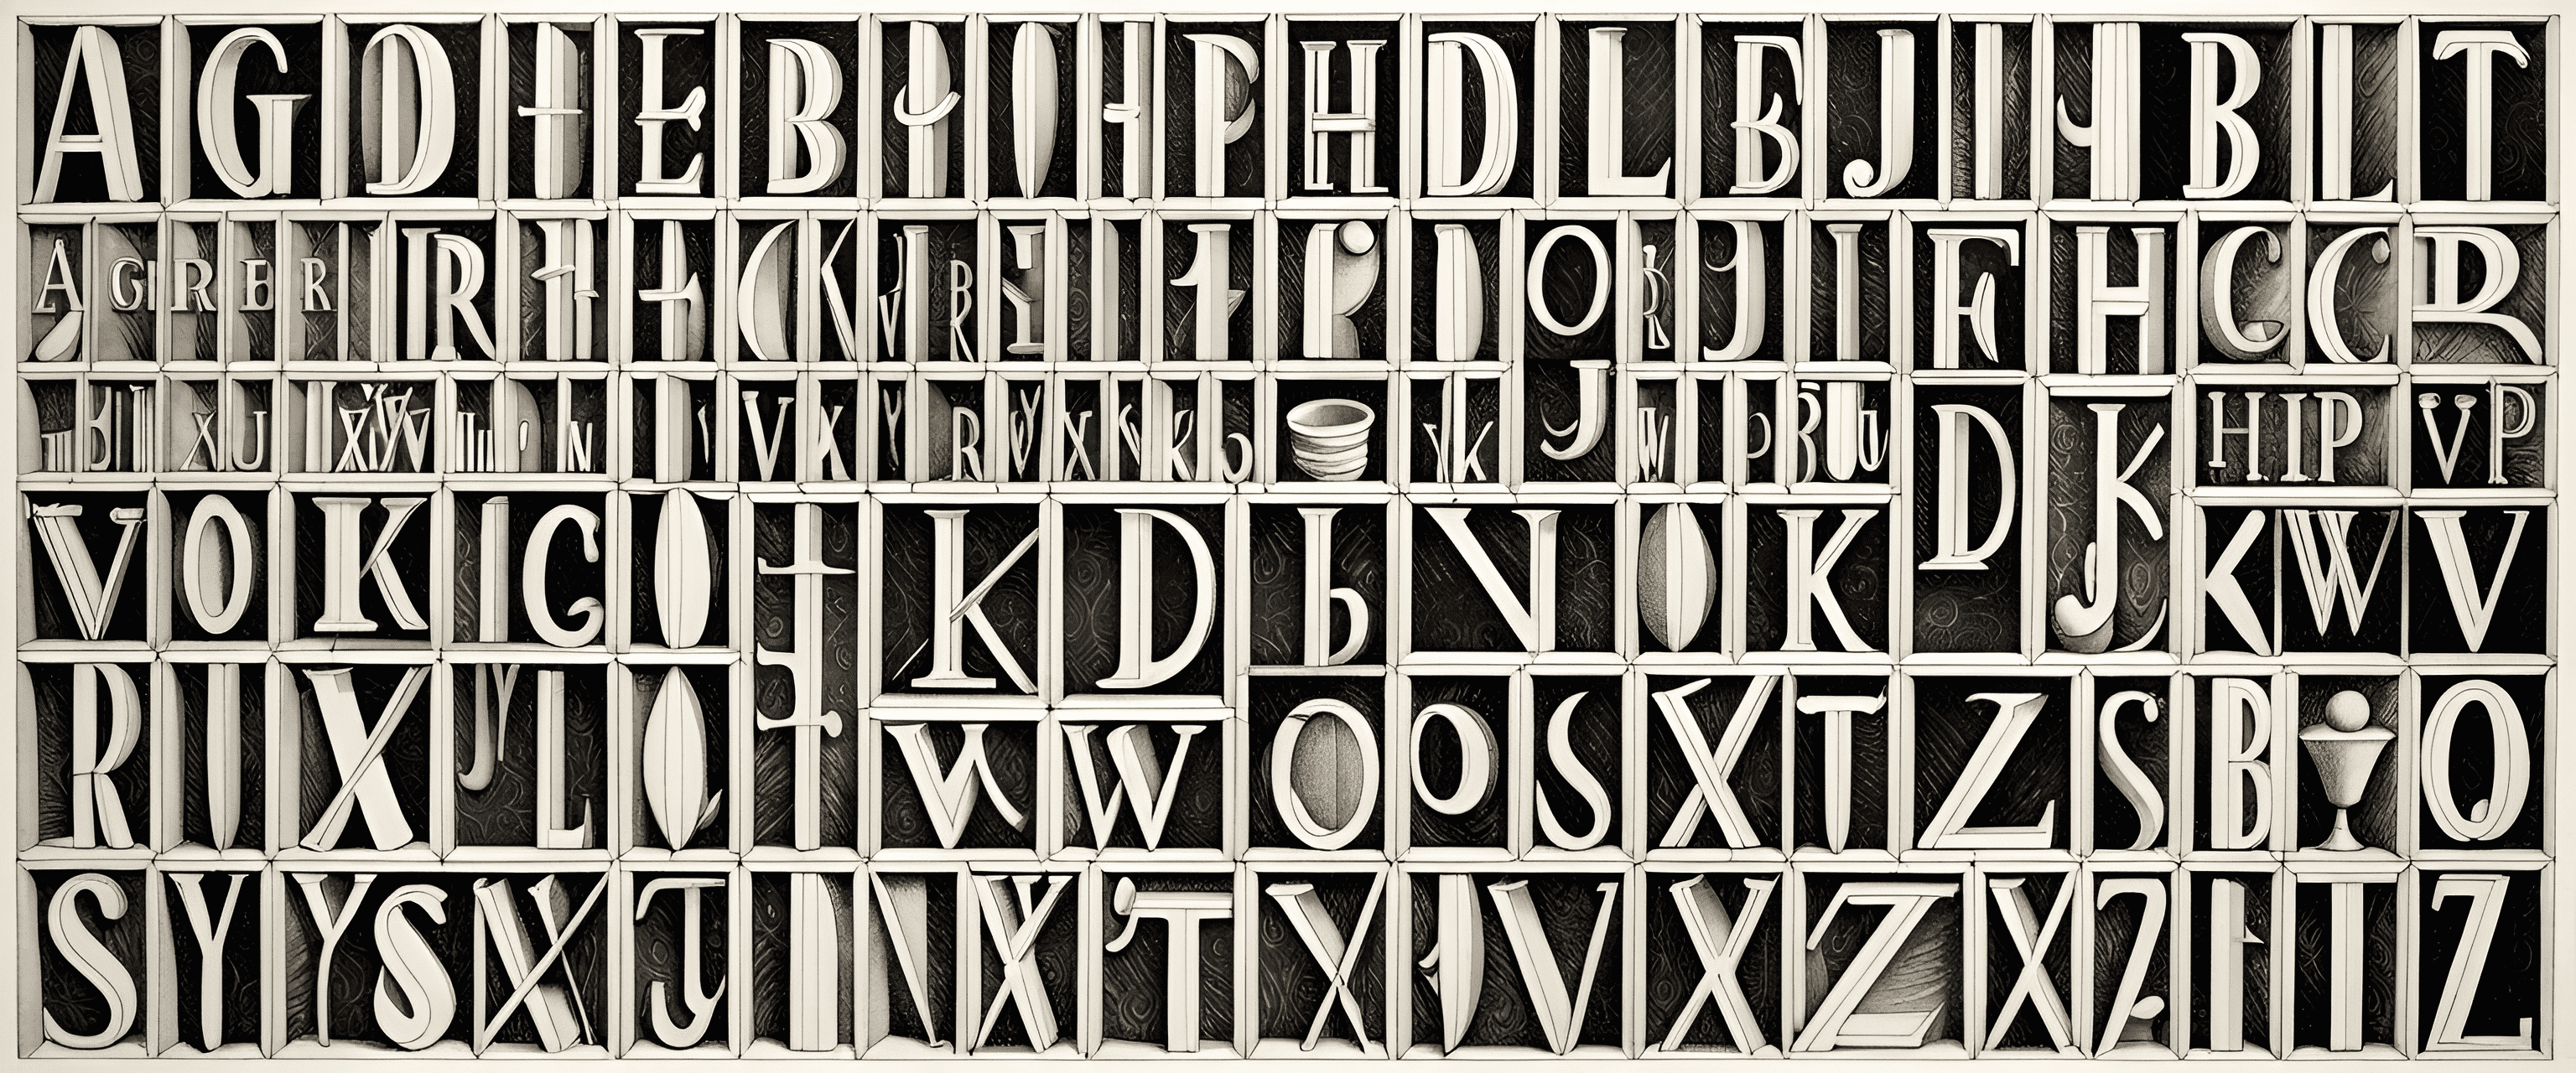 The 25 Most Popular Fonts for Letterpress Printed Designs